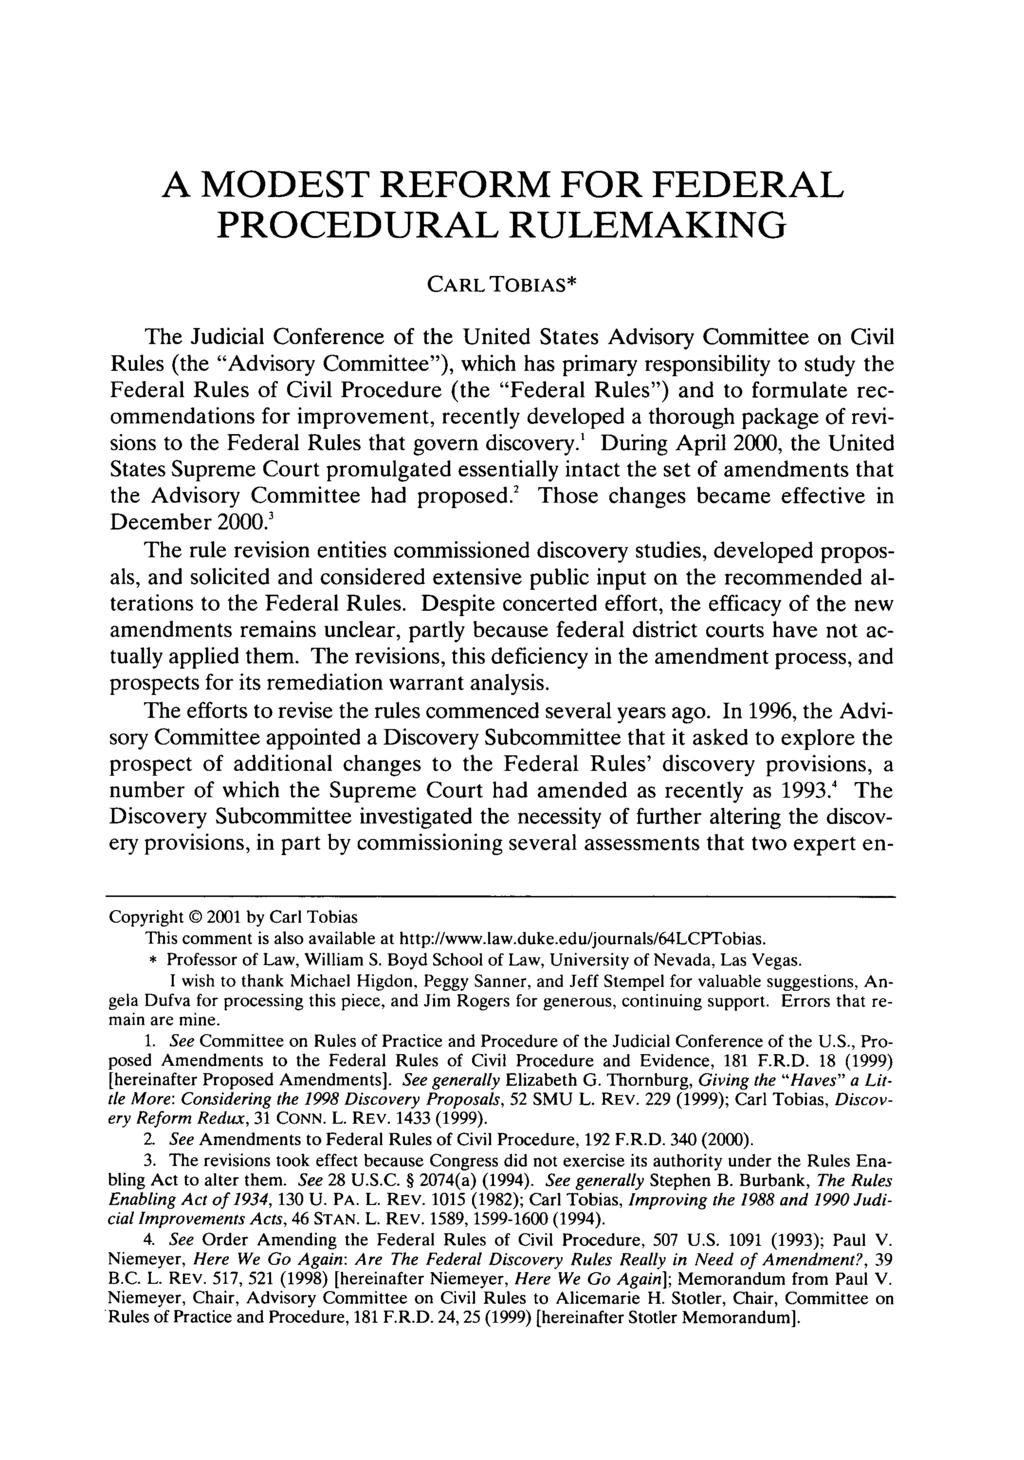 A MODEST REFORM FOR FEDERAL PROCEDURAL RULEMAKING CARL TOBIAS* The Judicial Conference of the United States Advisory Committee on Civil Rules (the "Advisory Committee"), which has primary